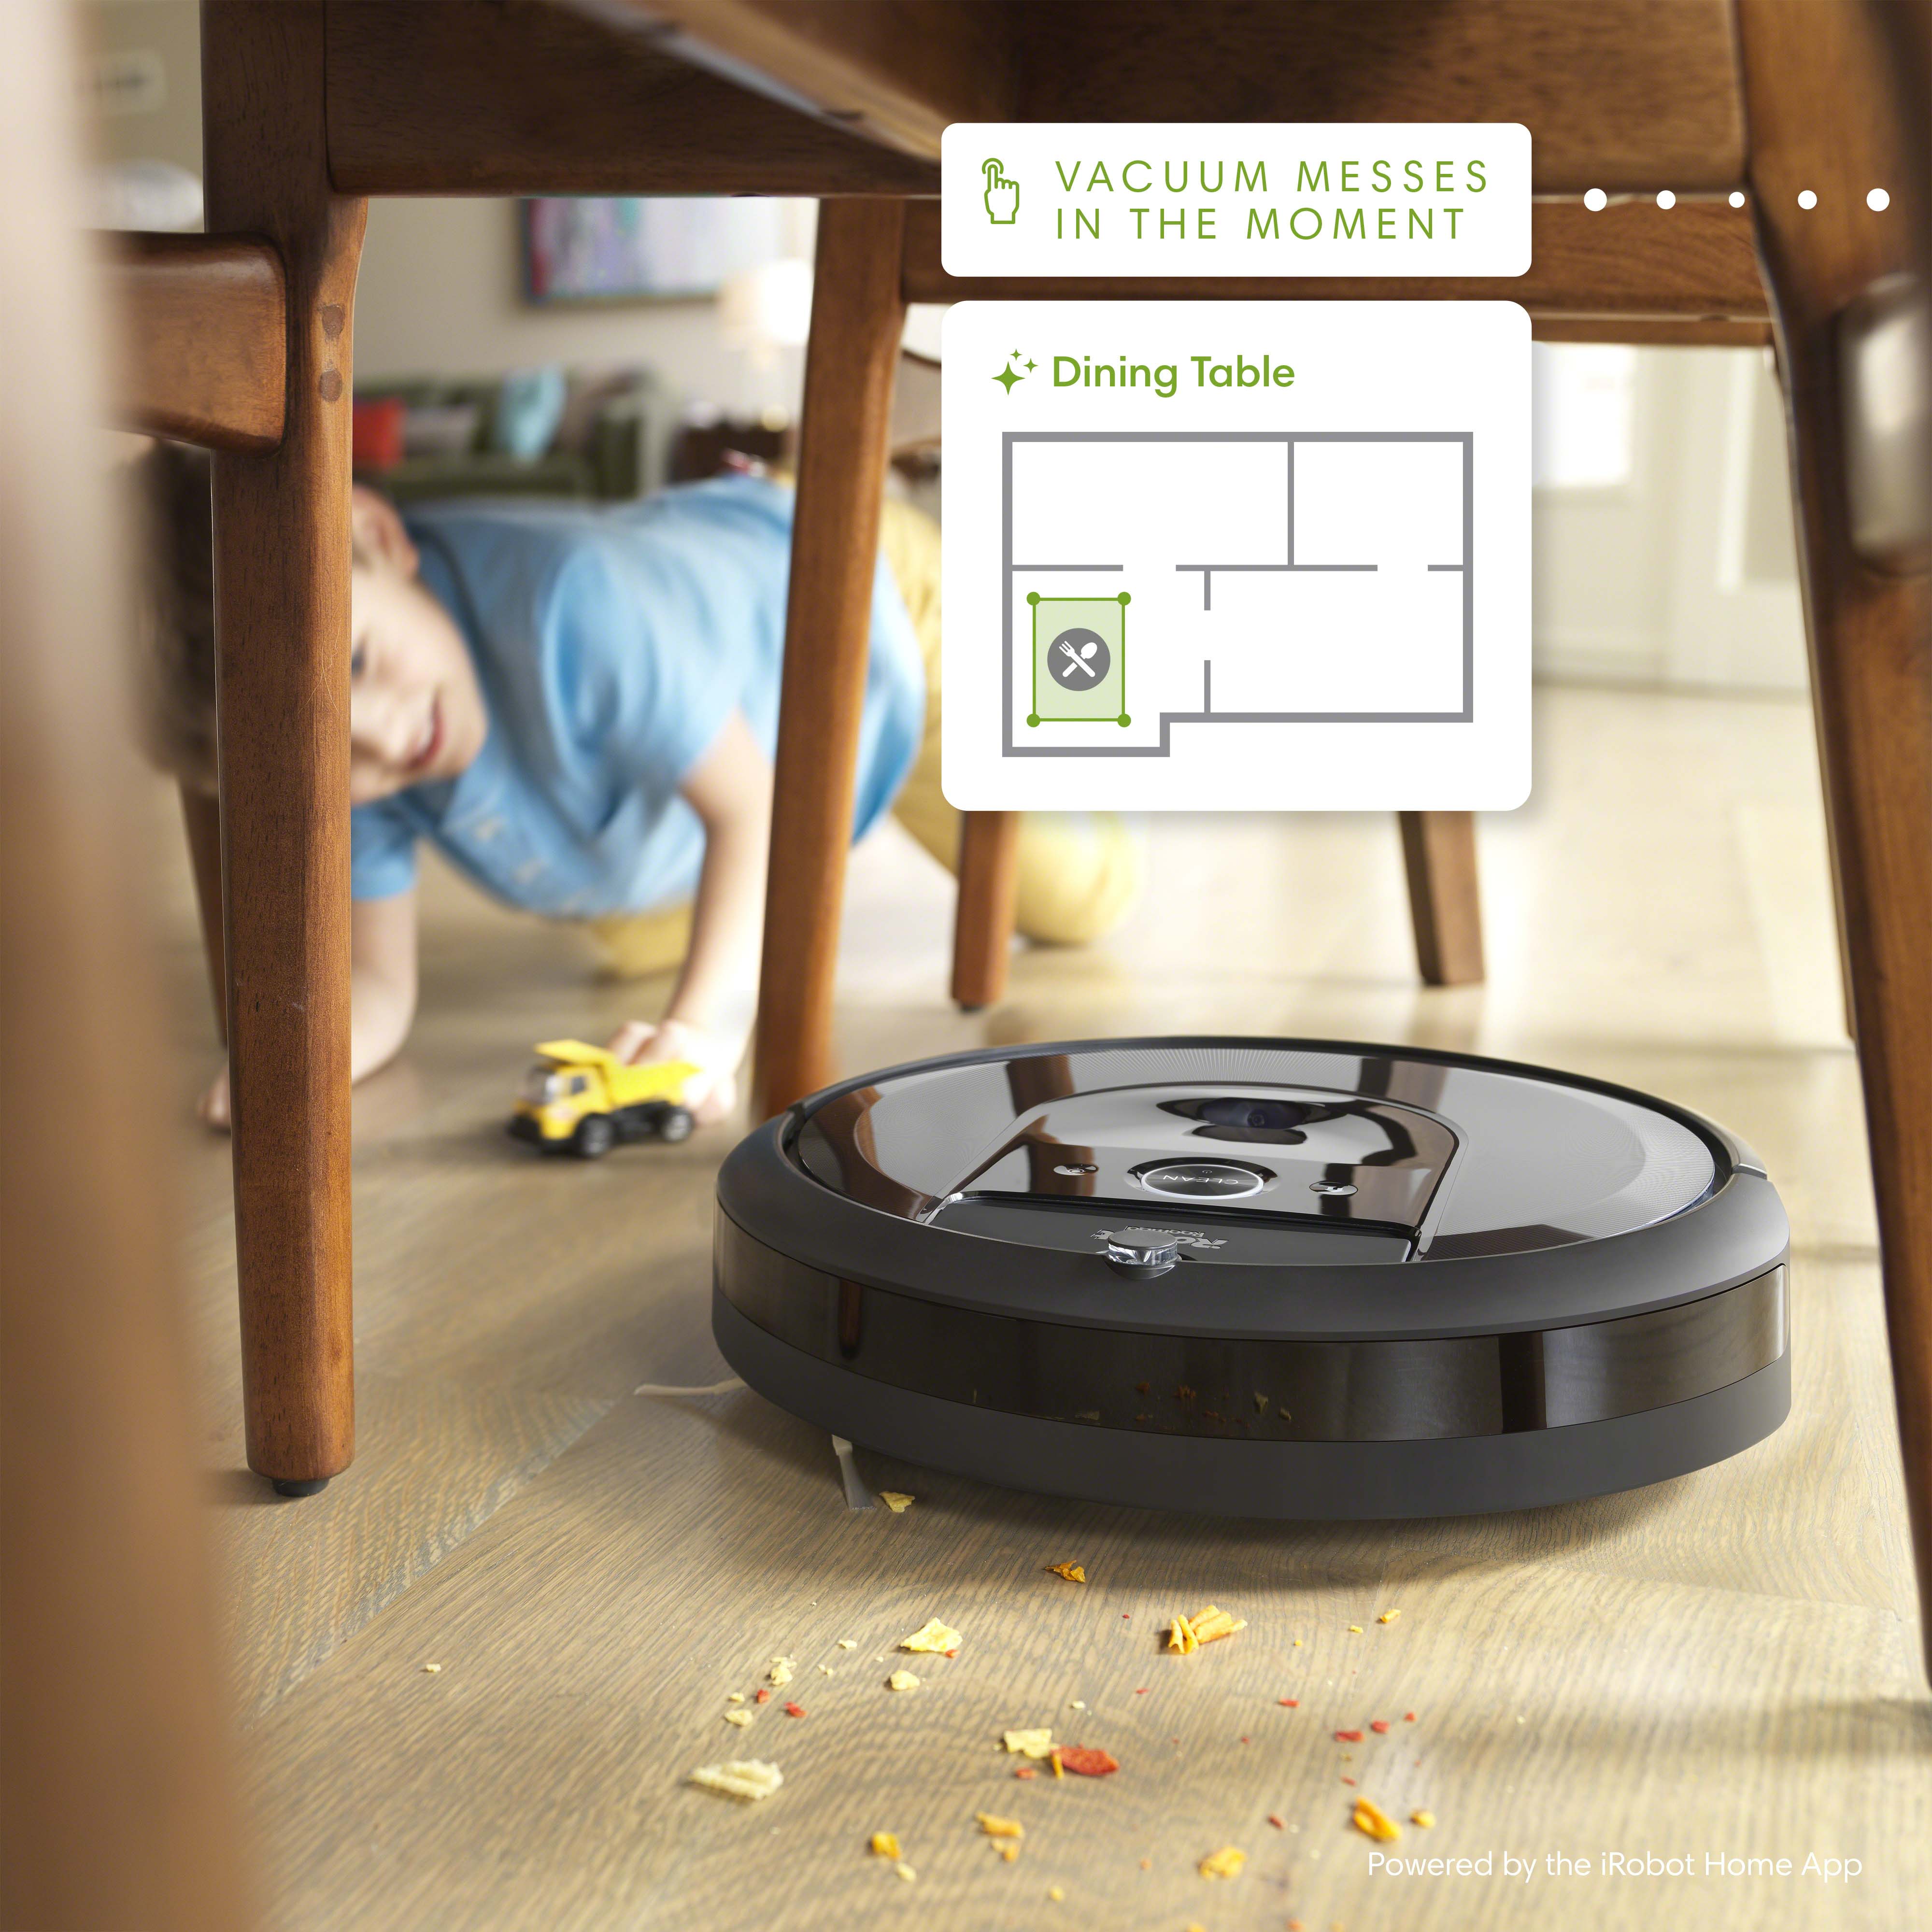 iRobot Roomba i7 (7150) Robot Vacuum- Wi-Fi Connected, Smart Mapping, Works with Google Home, Ideal for Pet Hair, Carpets, Hard Floors - image 6 of 16